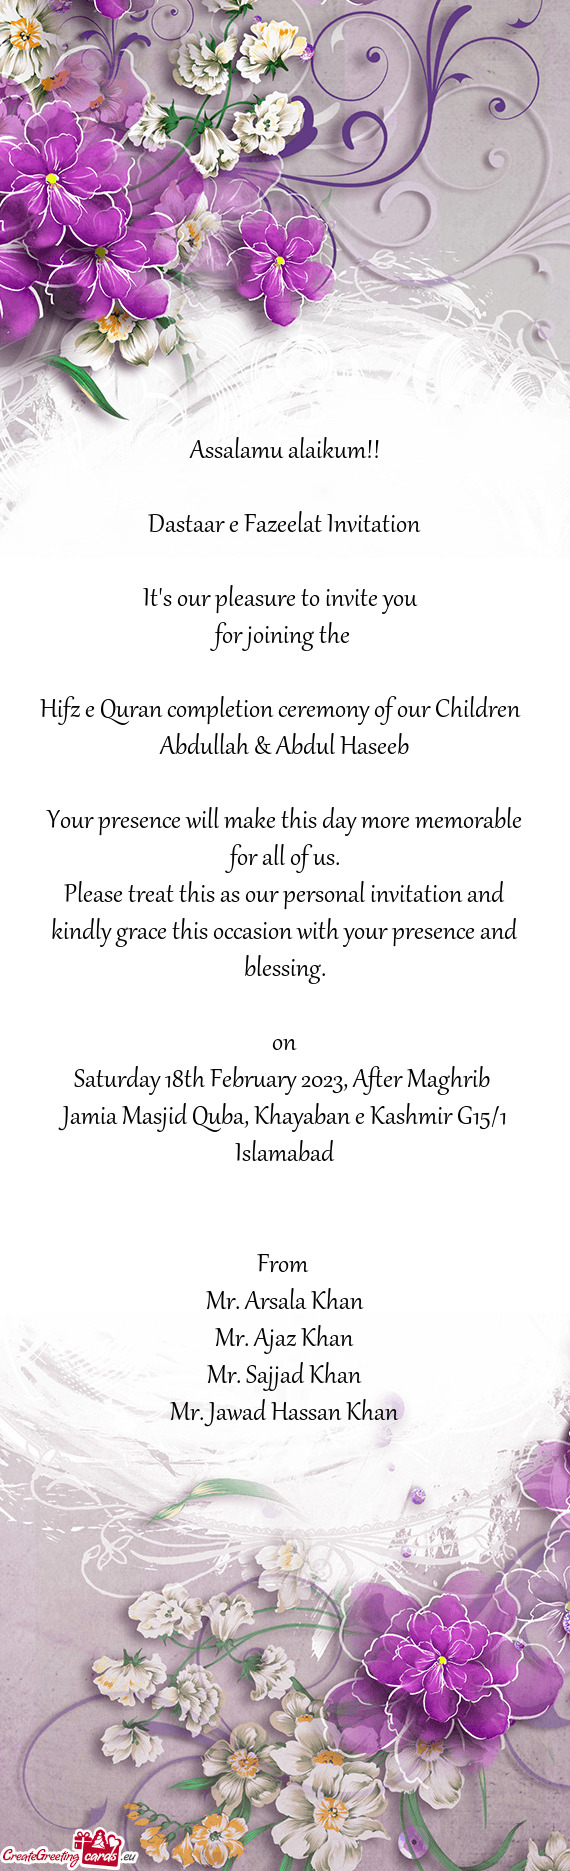 Hifz e Quran completion ceremony of our Children